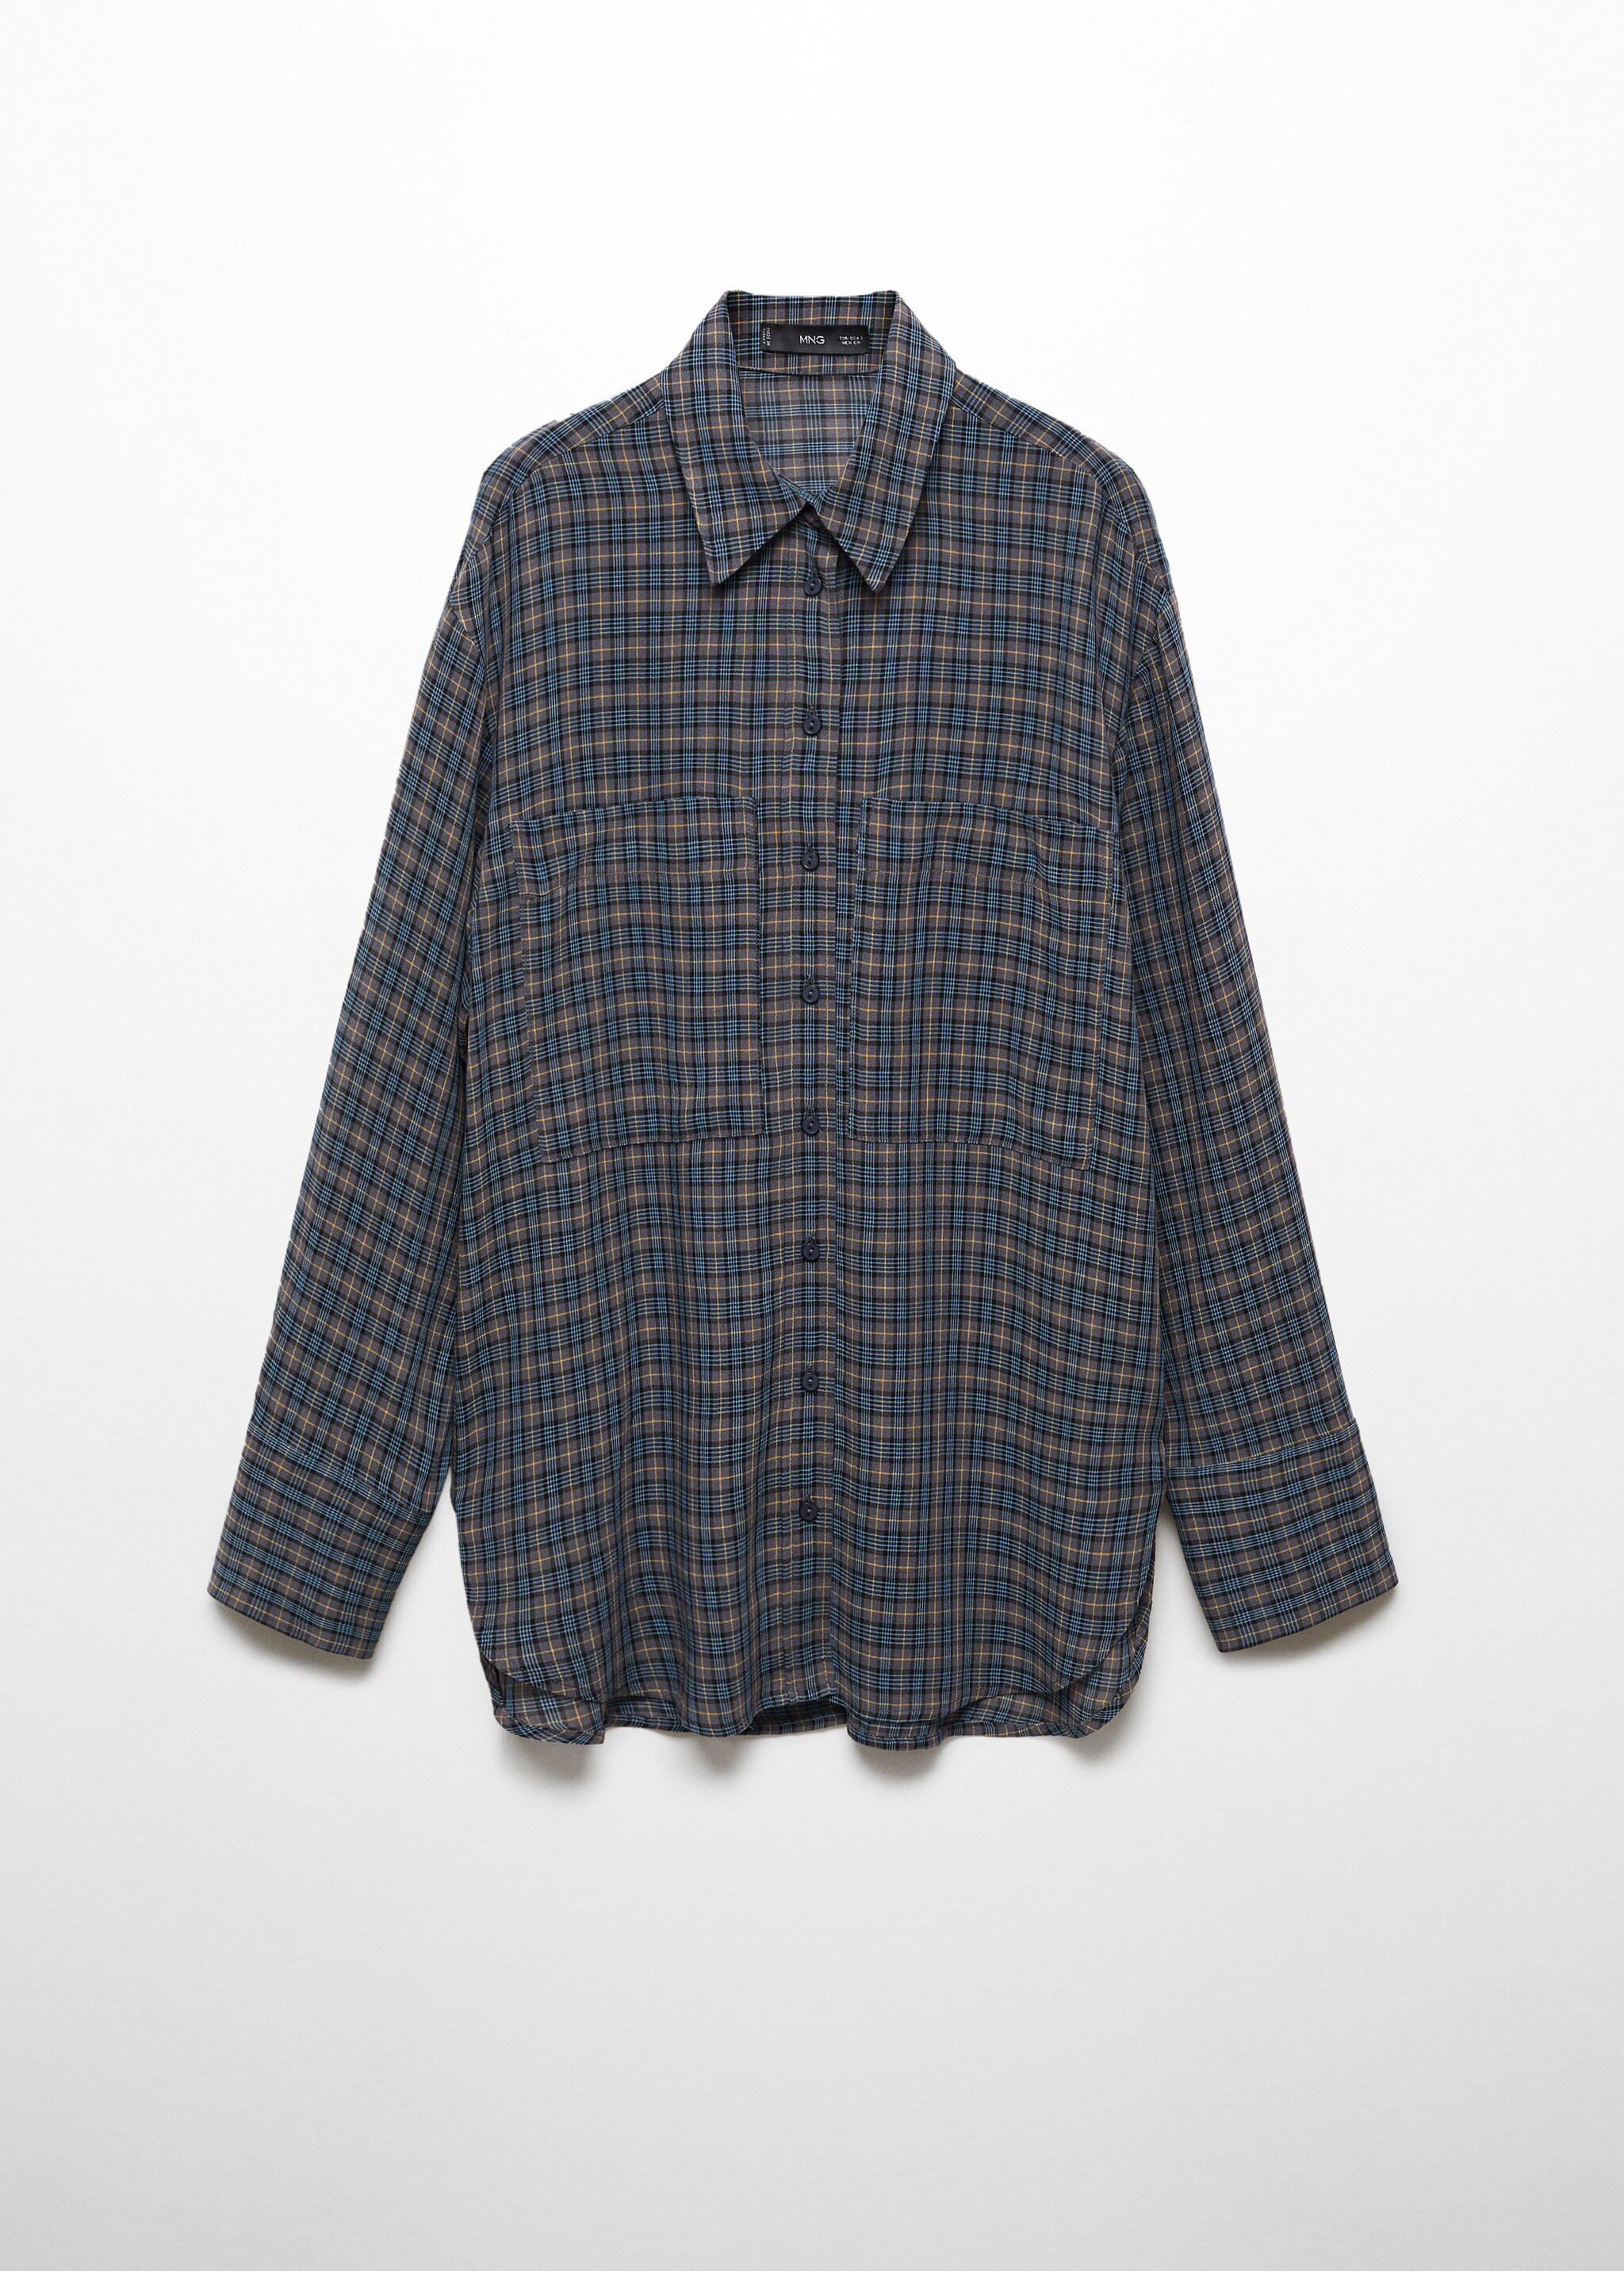 Oversize check shirt - Article without model